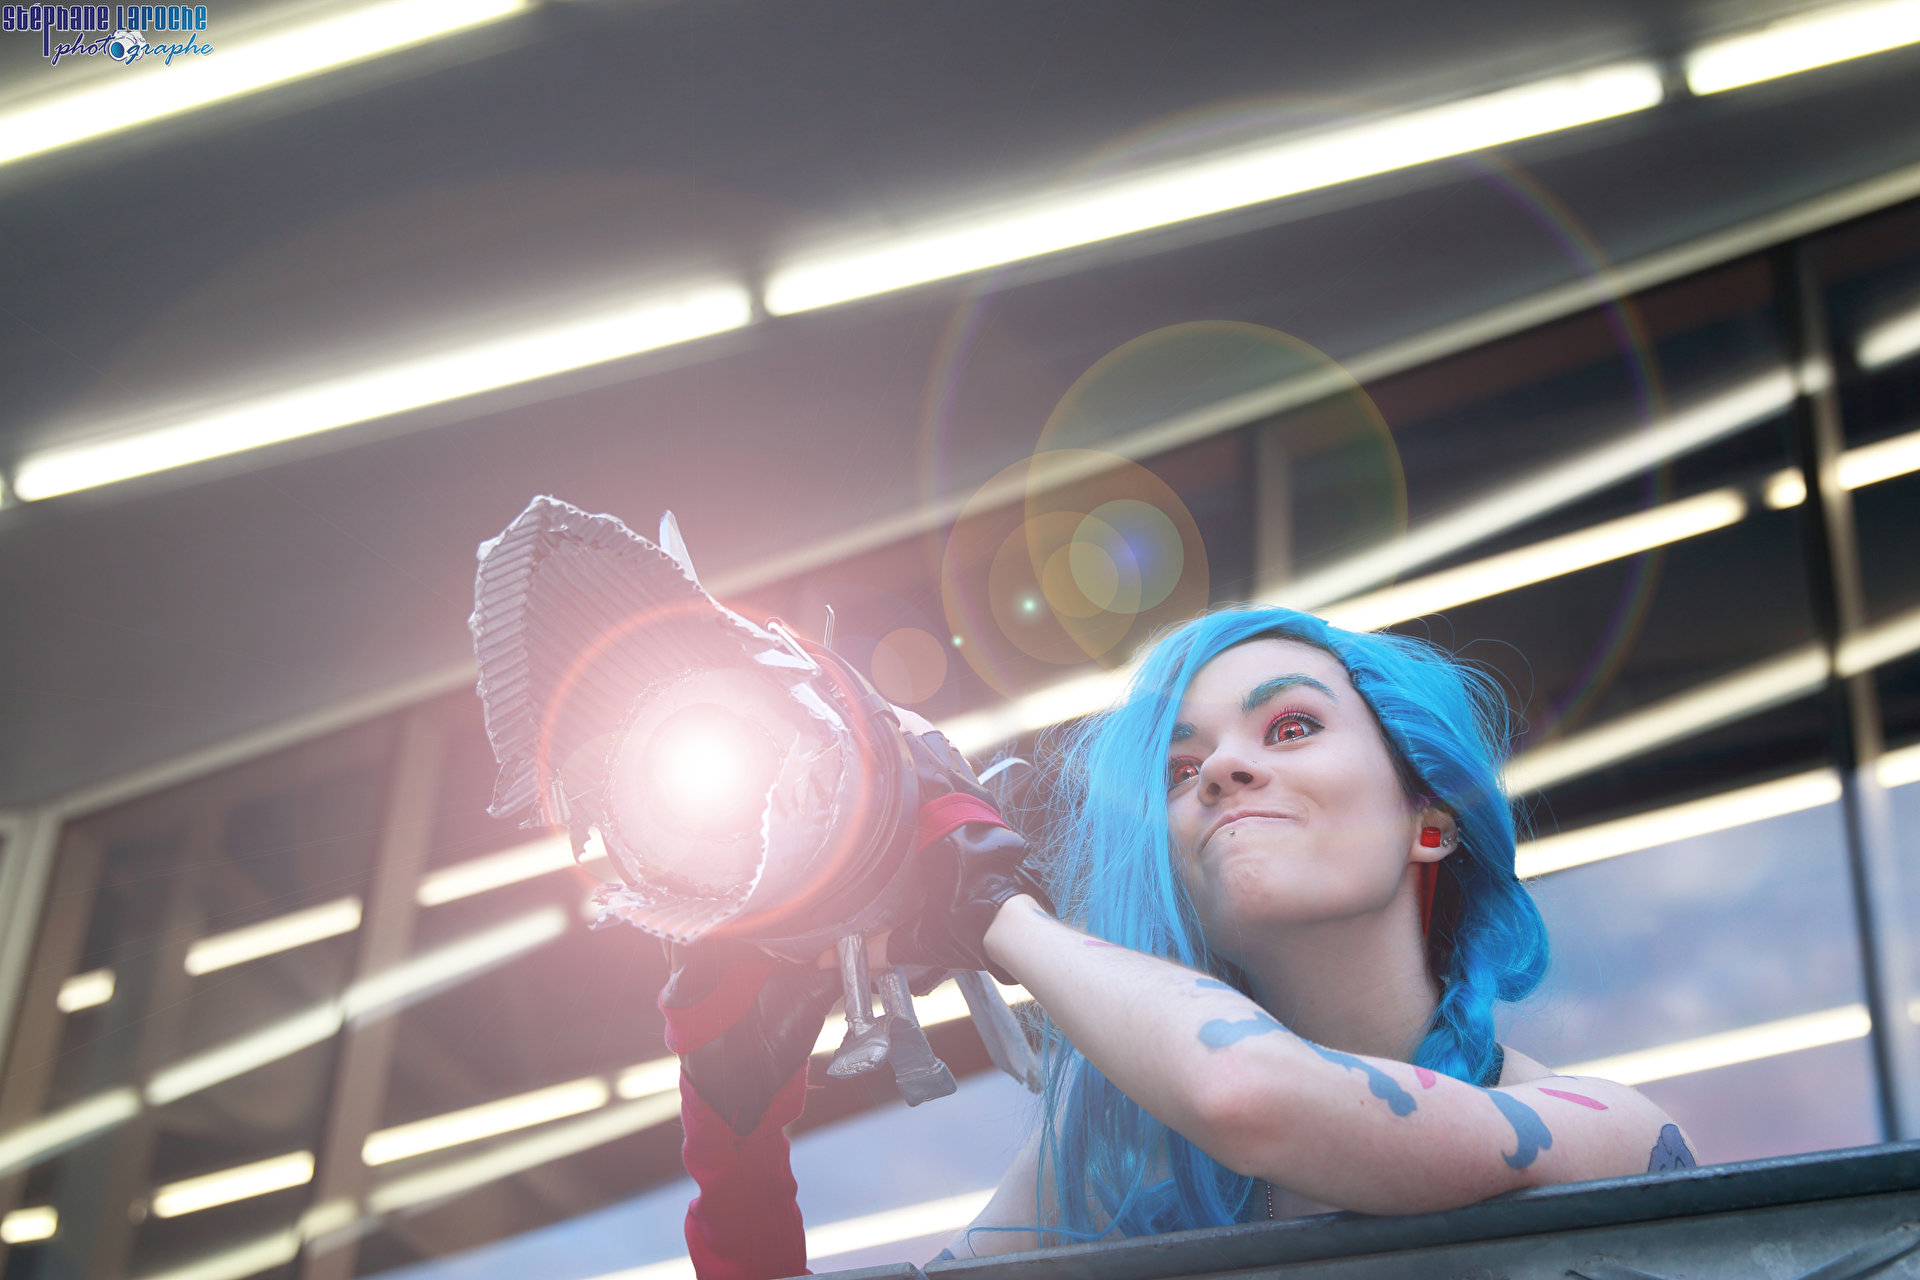 Cospix.net photo featuring Audrey Cosplay